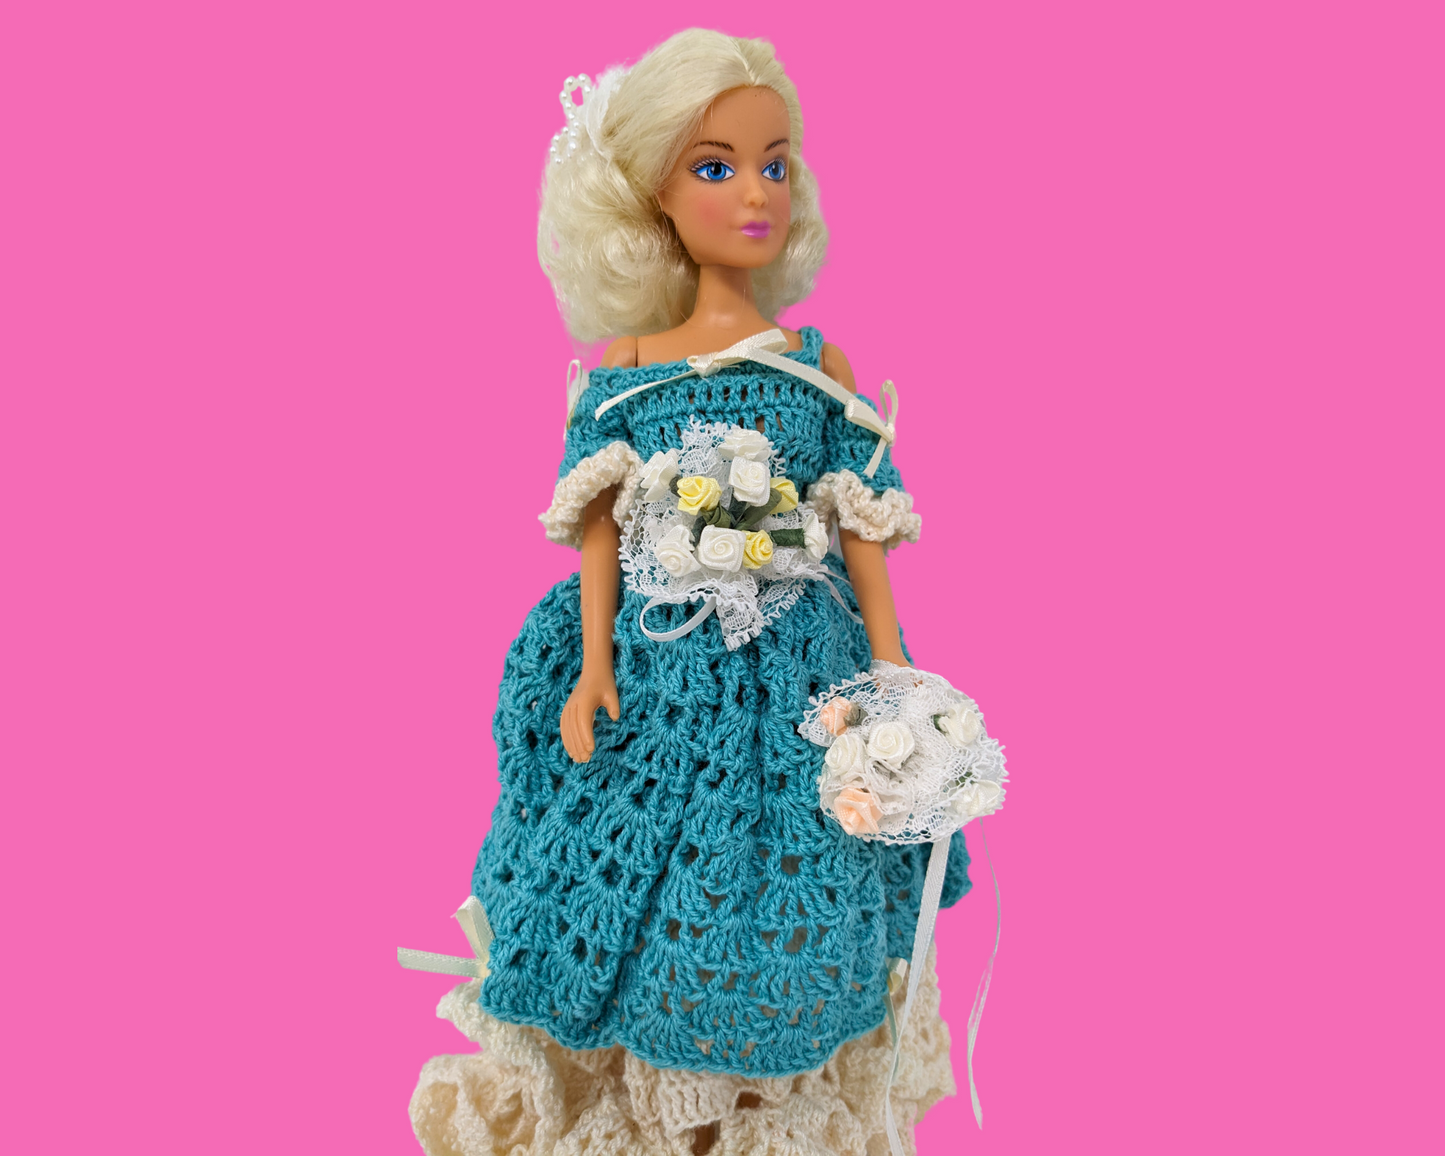 Vintage 1970's Barbie Doll with Hand Crocheted Outfit